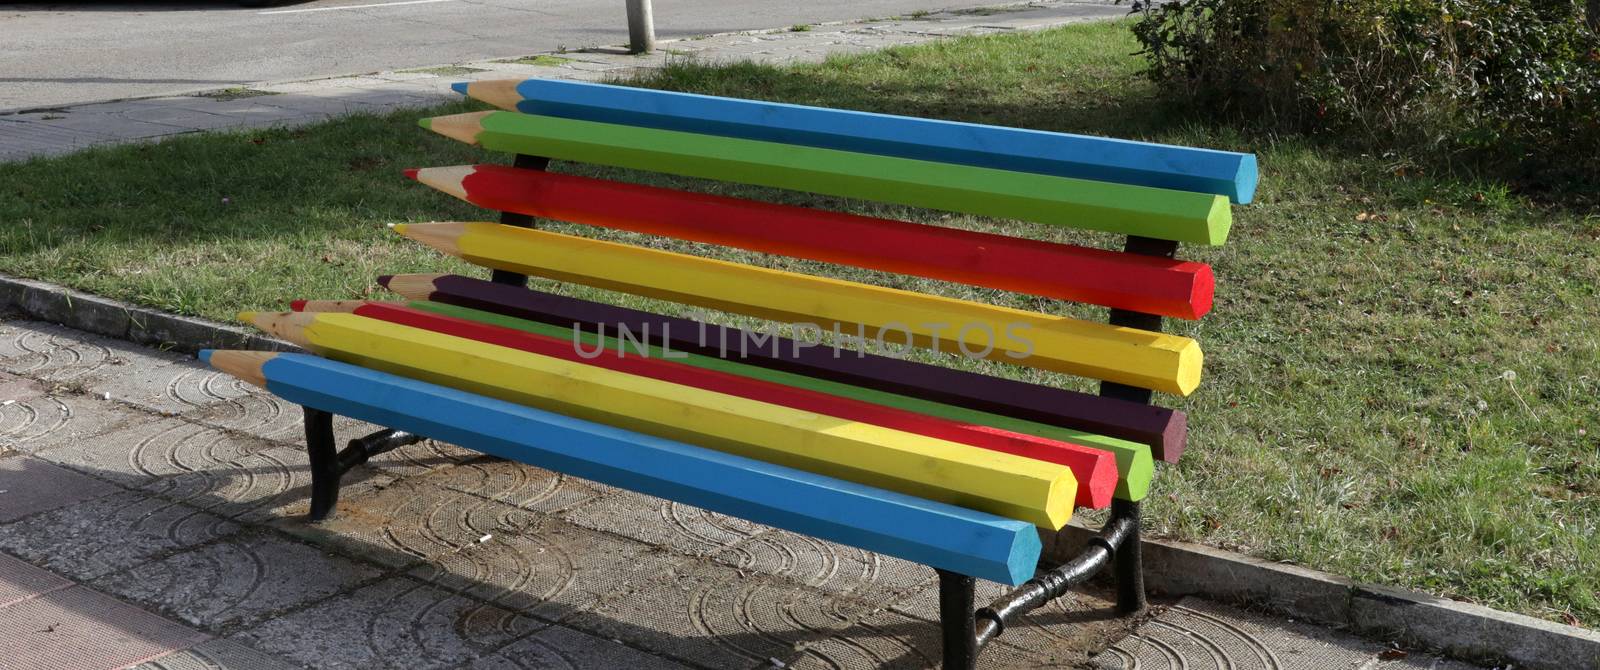 Bench of colorful pencils